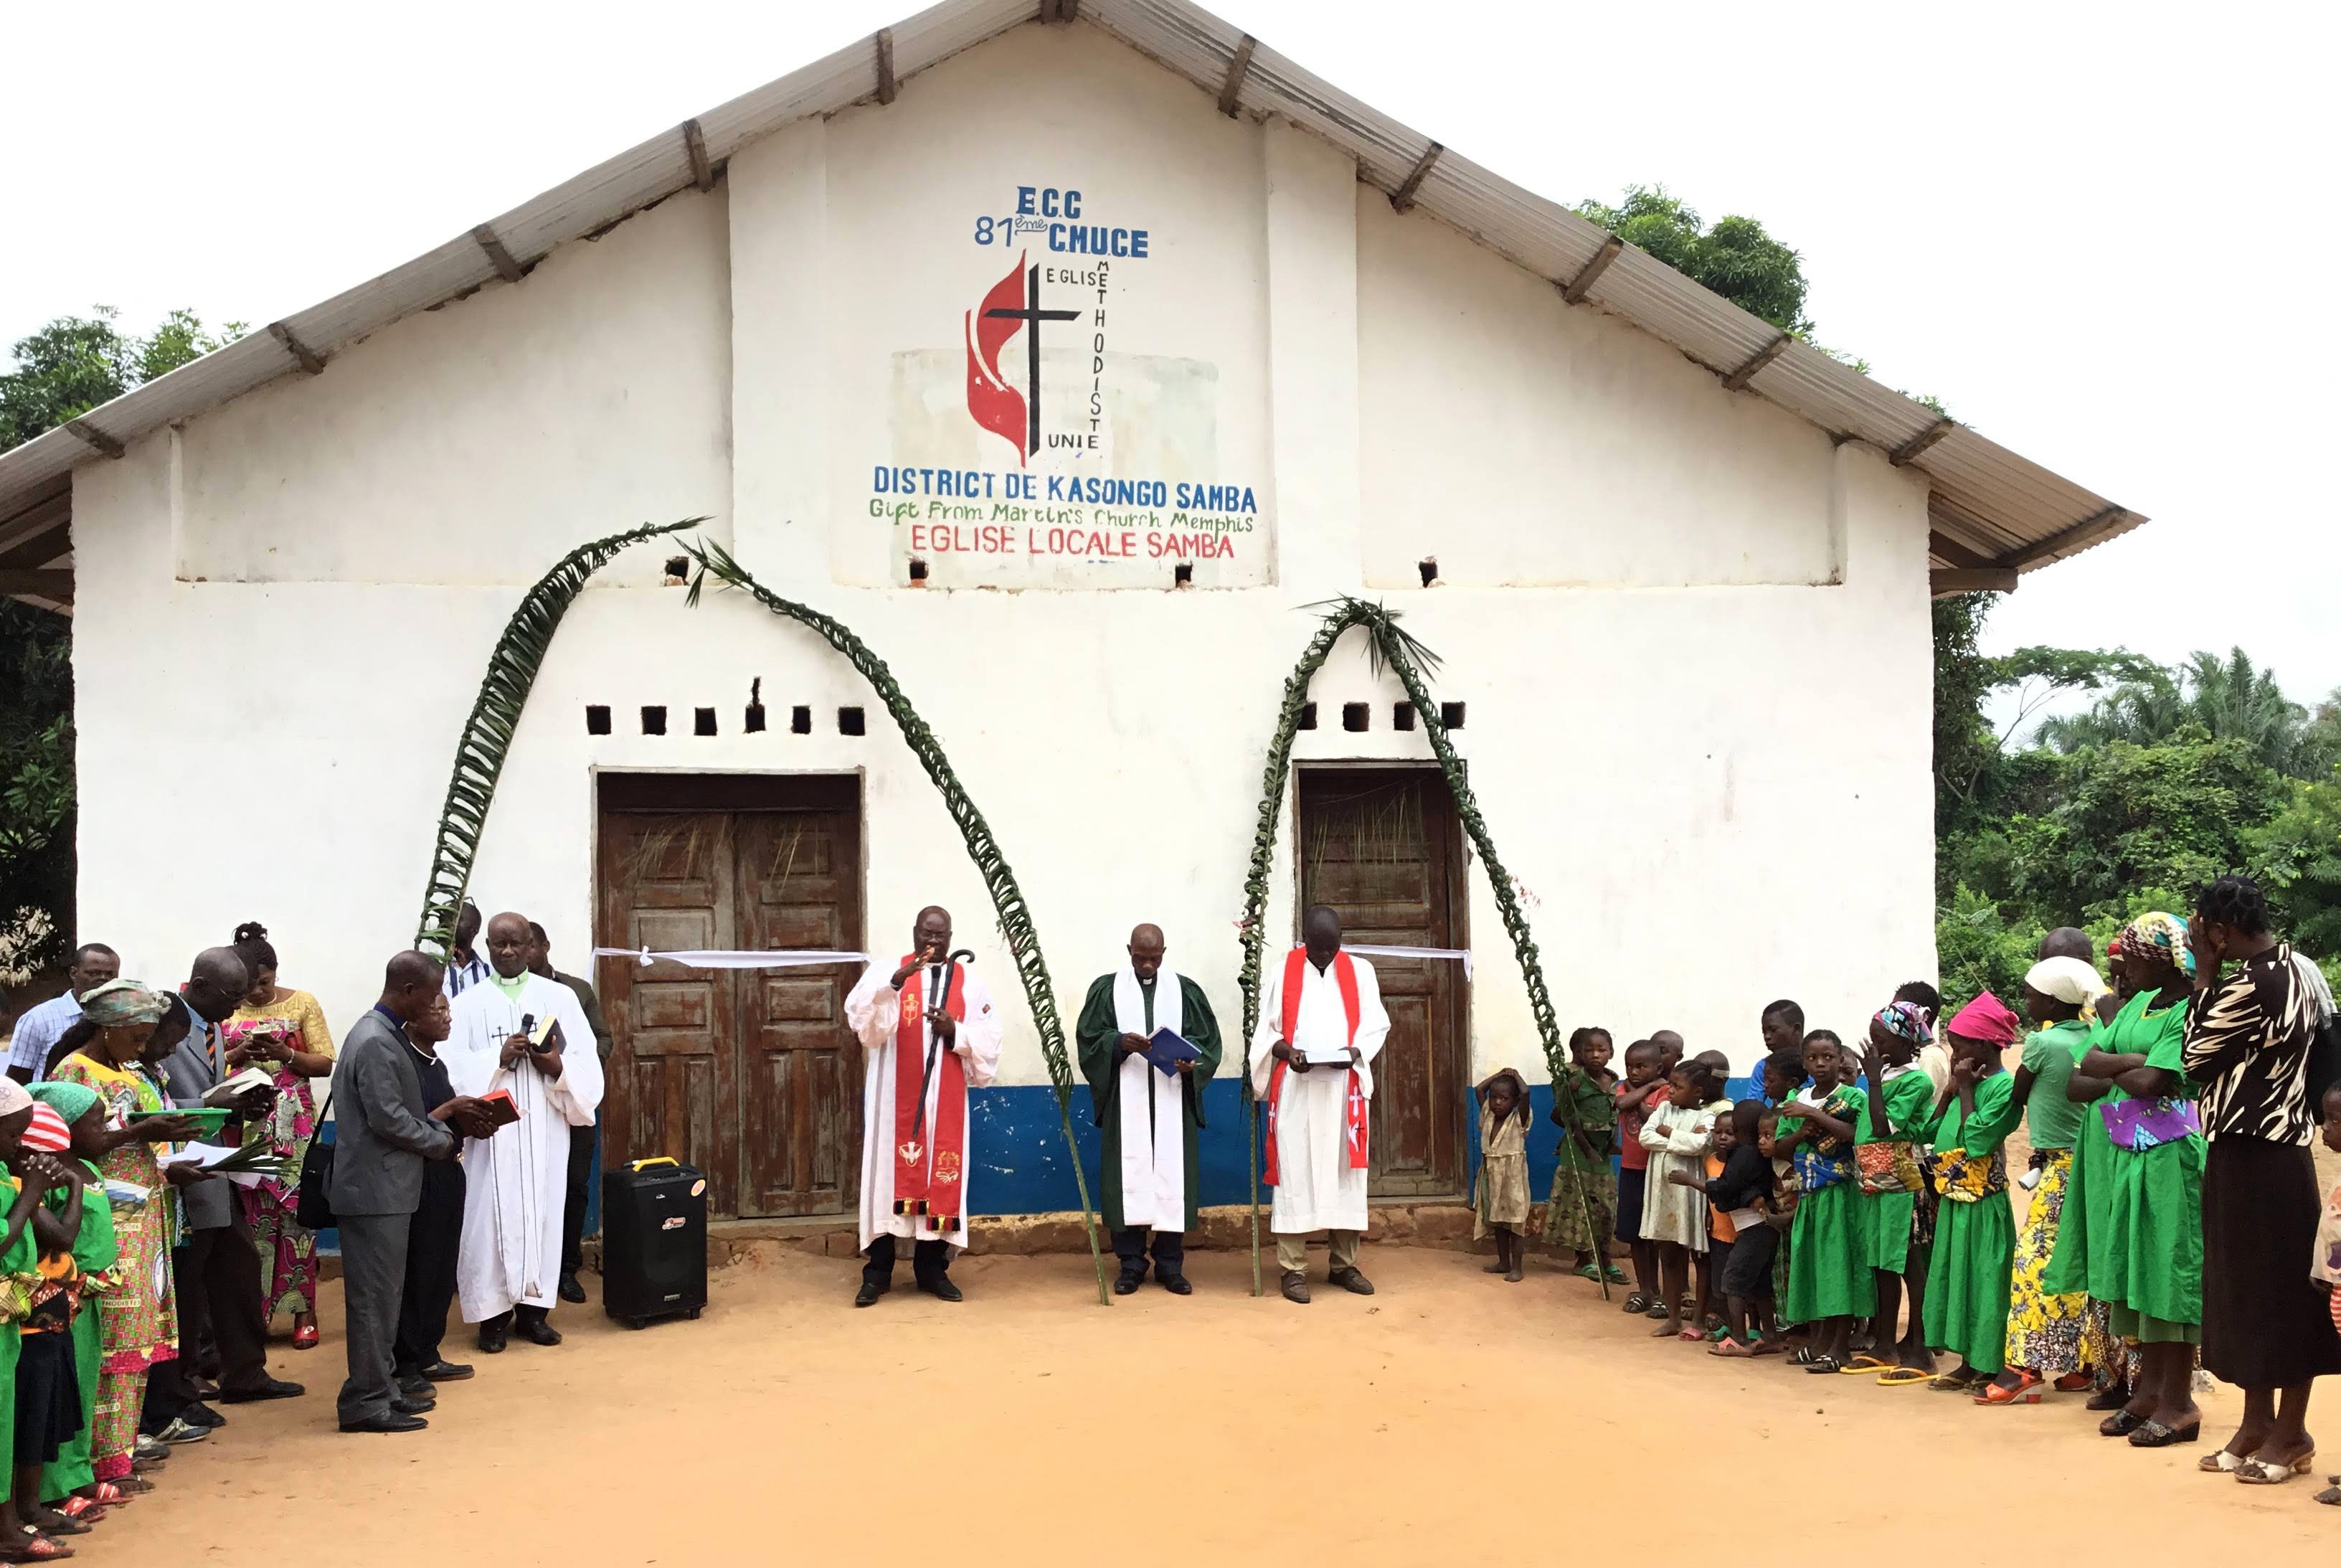 East Congo Bishop Gabriel Yemba Unda dedicates Samba United Methodist Church in the Kasongo-Samba District, which is nearly 250 miles from the bishop’s office. During his 10-day trip, Unda dedicated more than 10 churches built with the help of United Methodist partnerships and local contributions. Photo by Judith Osongo Yanga, UM News.